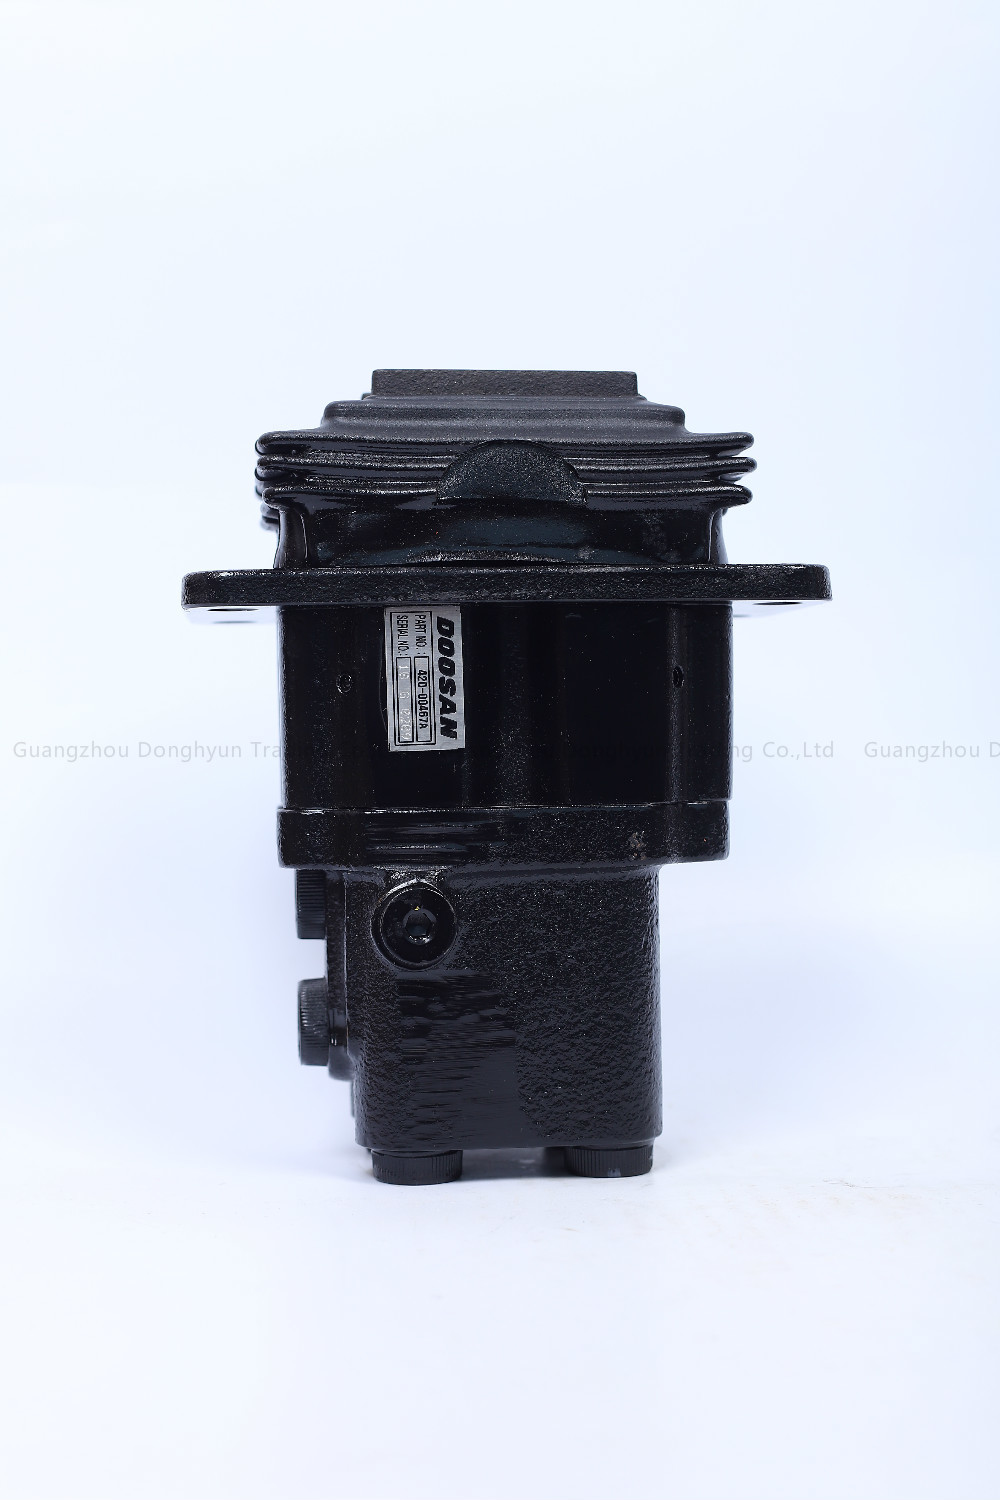 China Hydraulic pedal valve for crawler excavator components NVK45DT 2019 hot Sale wholesale